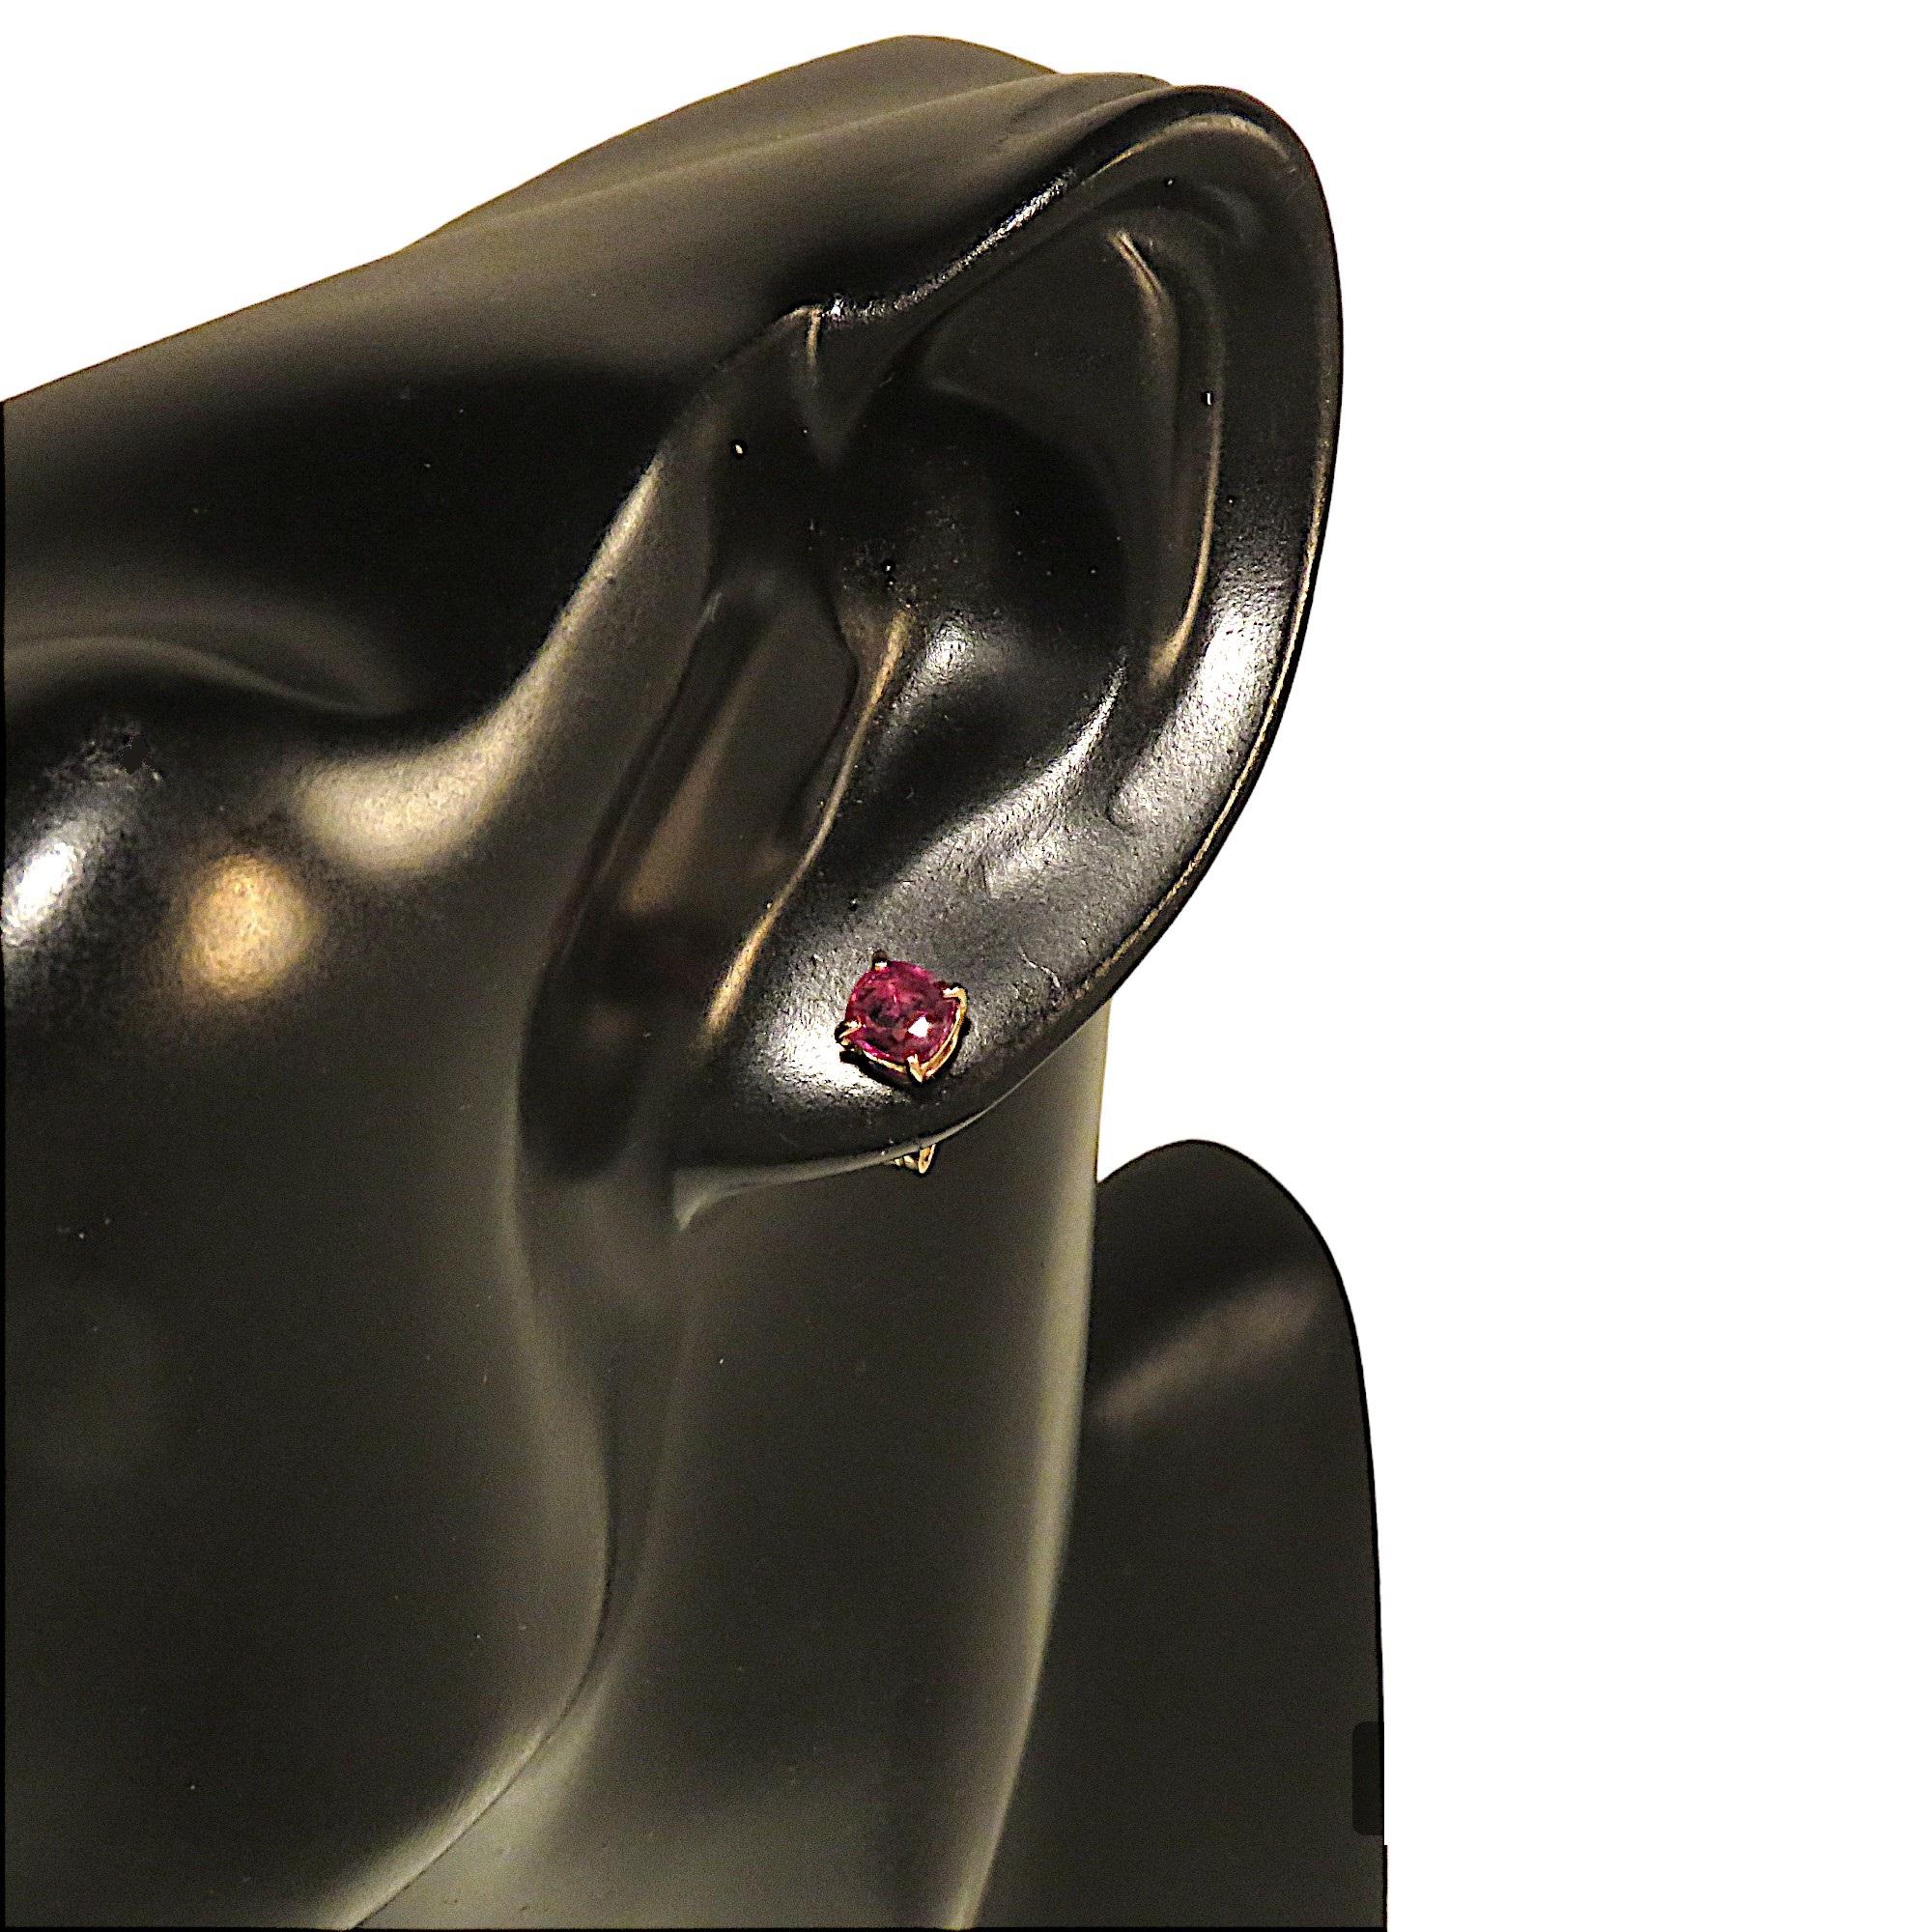 Single earring made by Botta Gioielli in Milan, Italy in 9k rose gold with a 5 mm / 0.196 inches brilliant-cut ruby totaling 0.50 ct. The stone is fixed in a jaw bezel with gallery. The earring has a butterfly clasp. The total weight of the earring